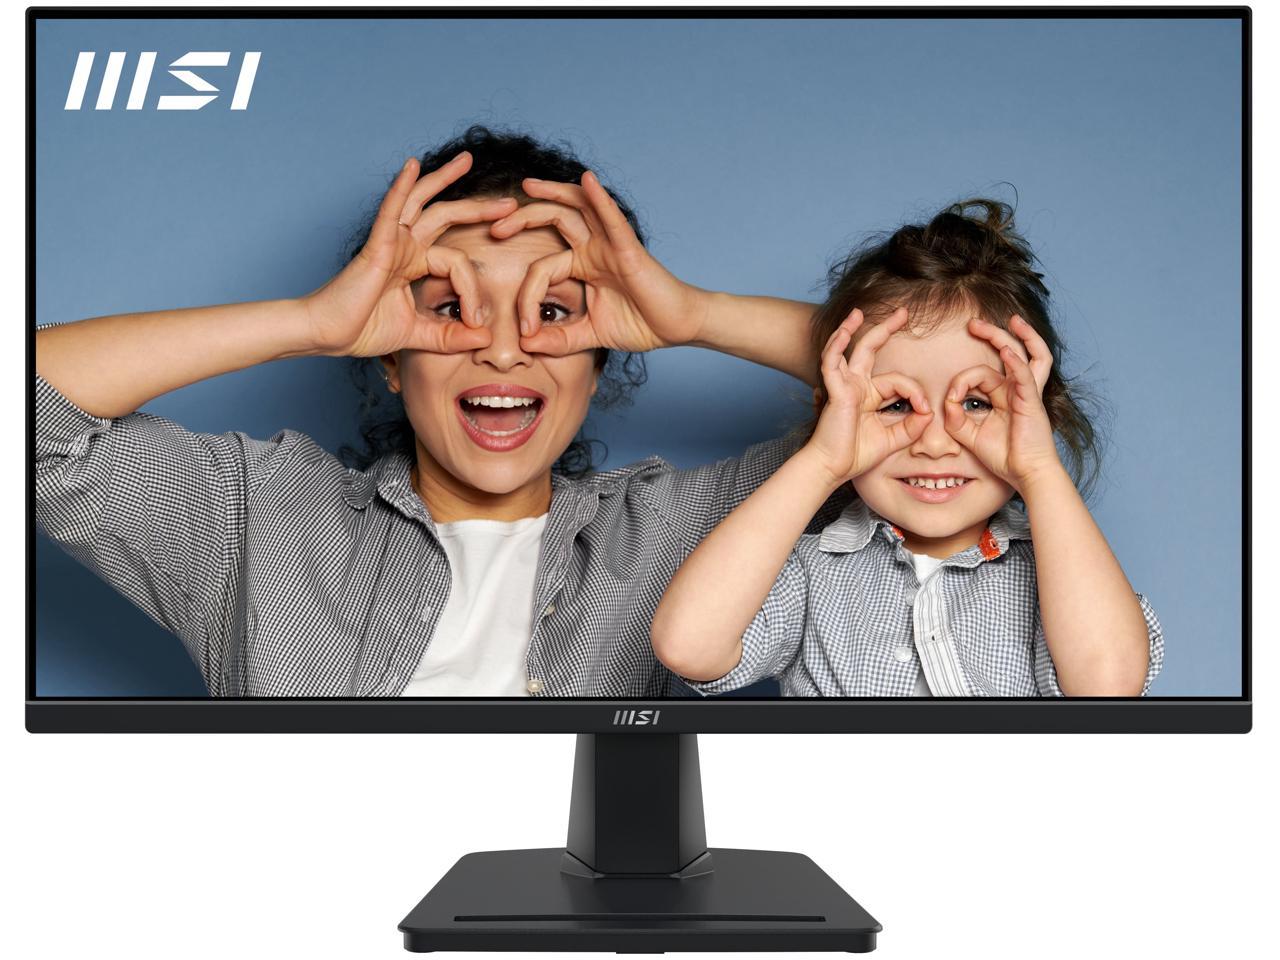 MSI Pro 1920x1080 FHD 100Hz IPS Gaming Monitor w/ HDMI Cable, Built-In Speakers, & Accessory Slot: 25" (MP251) $80 or 27" (MP275) $100 + Free Shipping